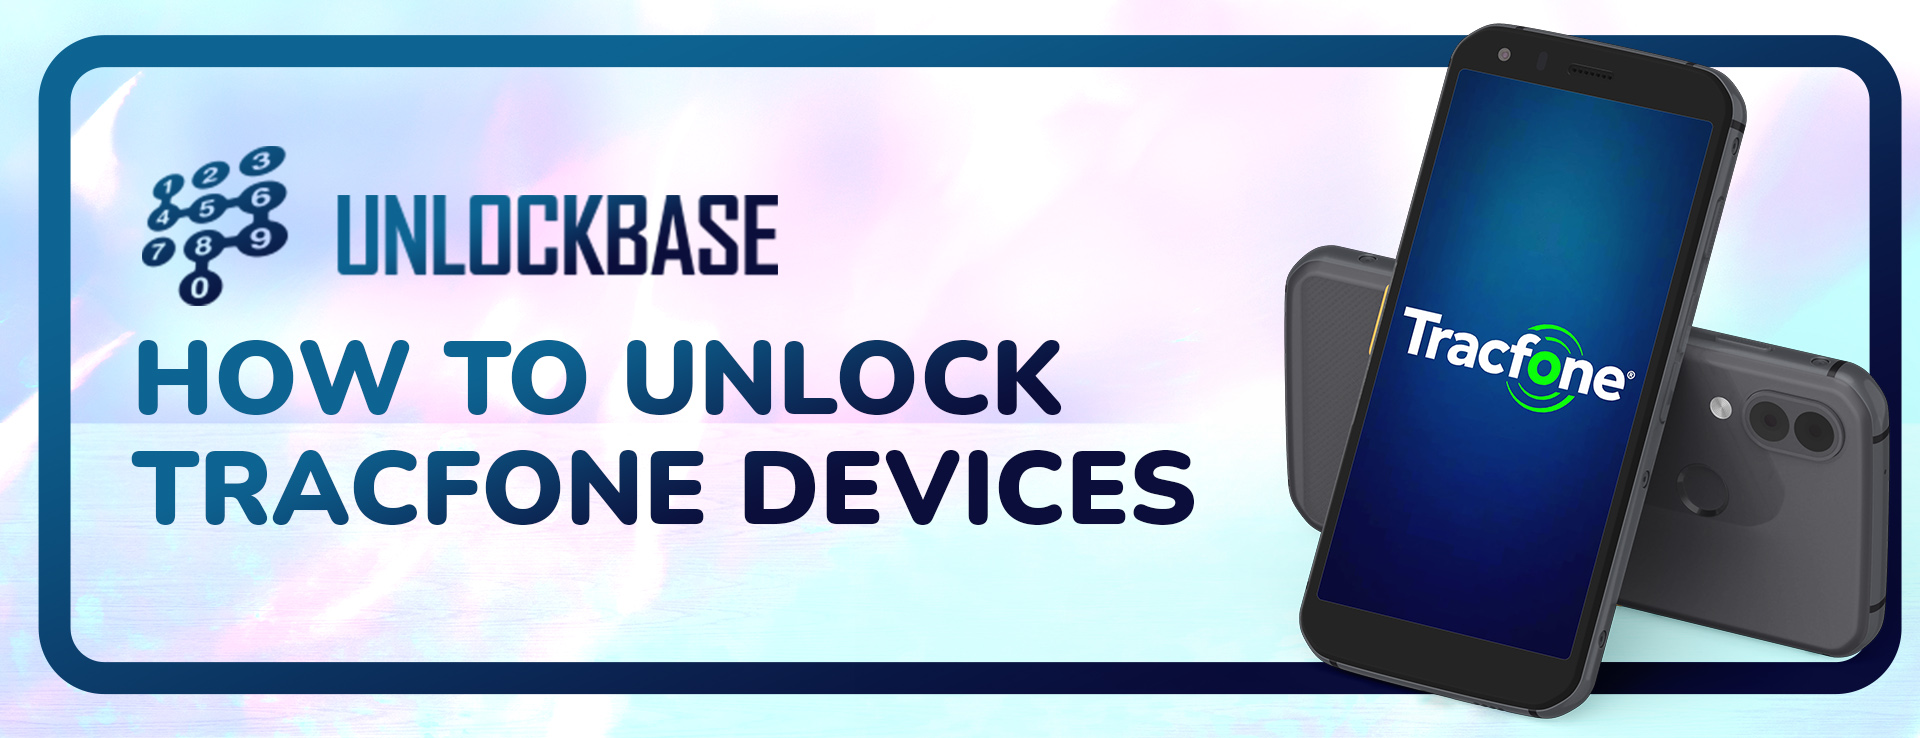 How To Unlock Tracfone Different Devices